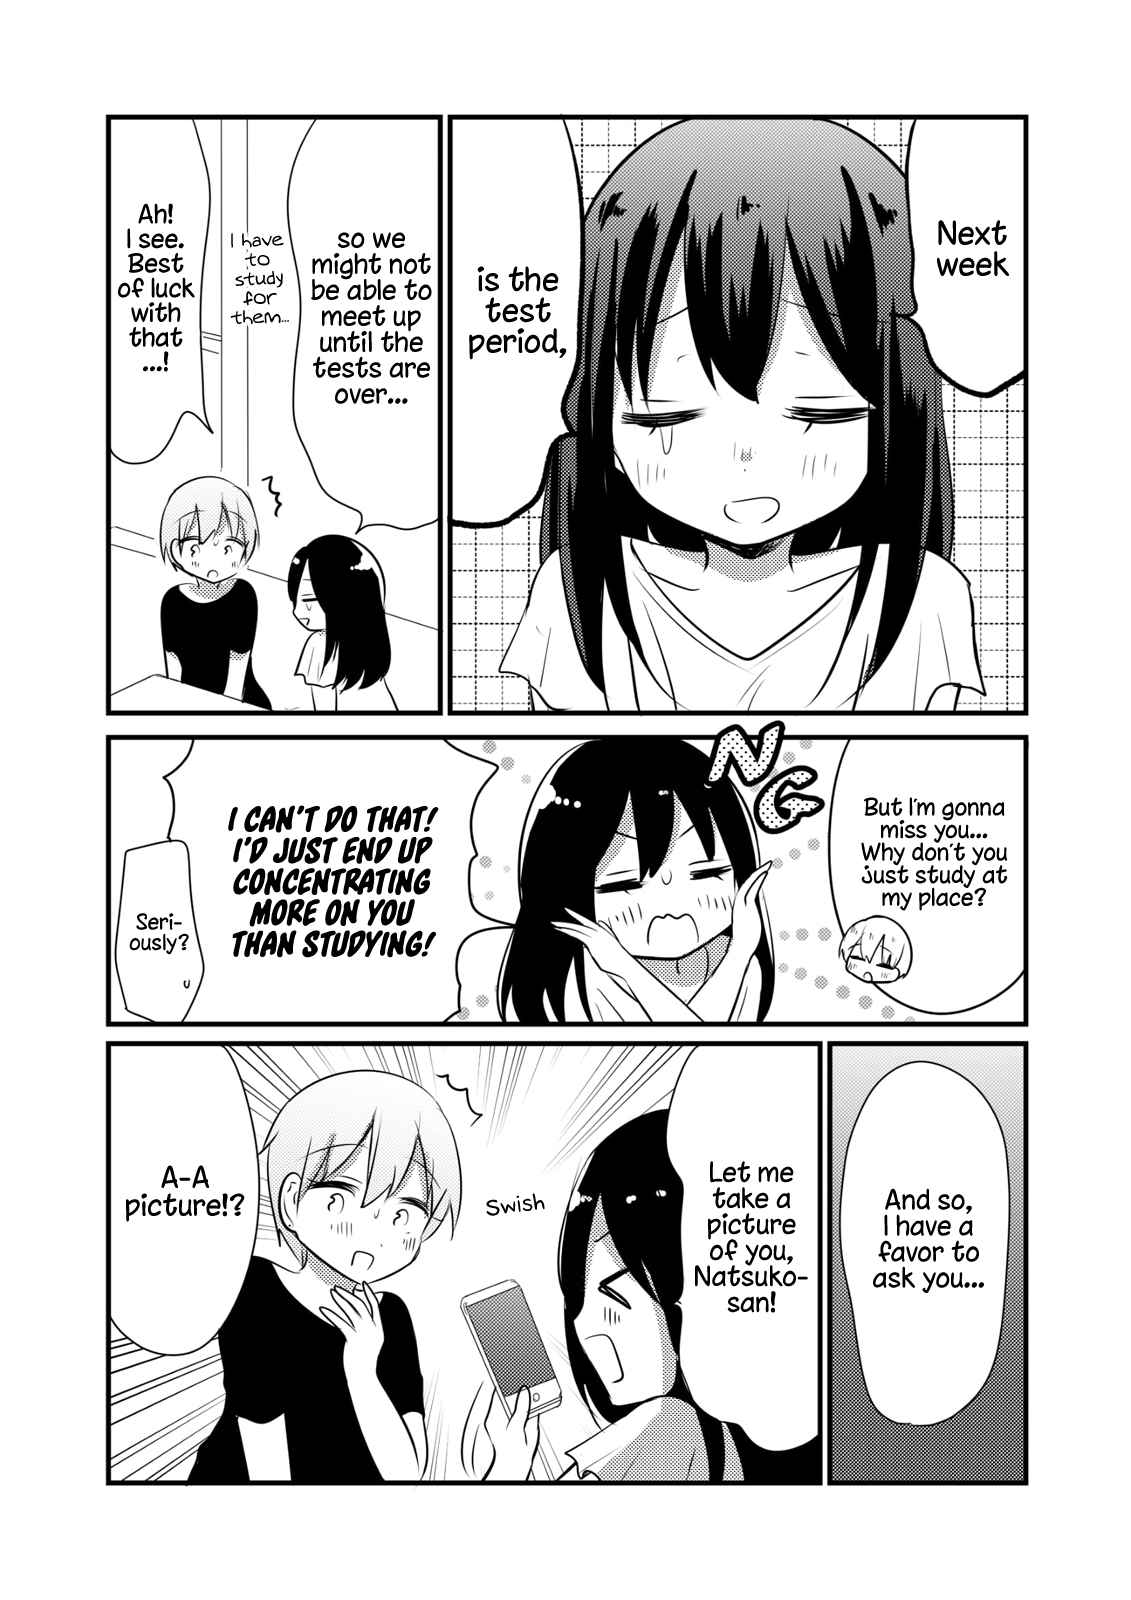 About a College Girl Who Gets Picked Up at a Mixer by an Older Girl Ch. 7